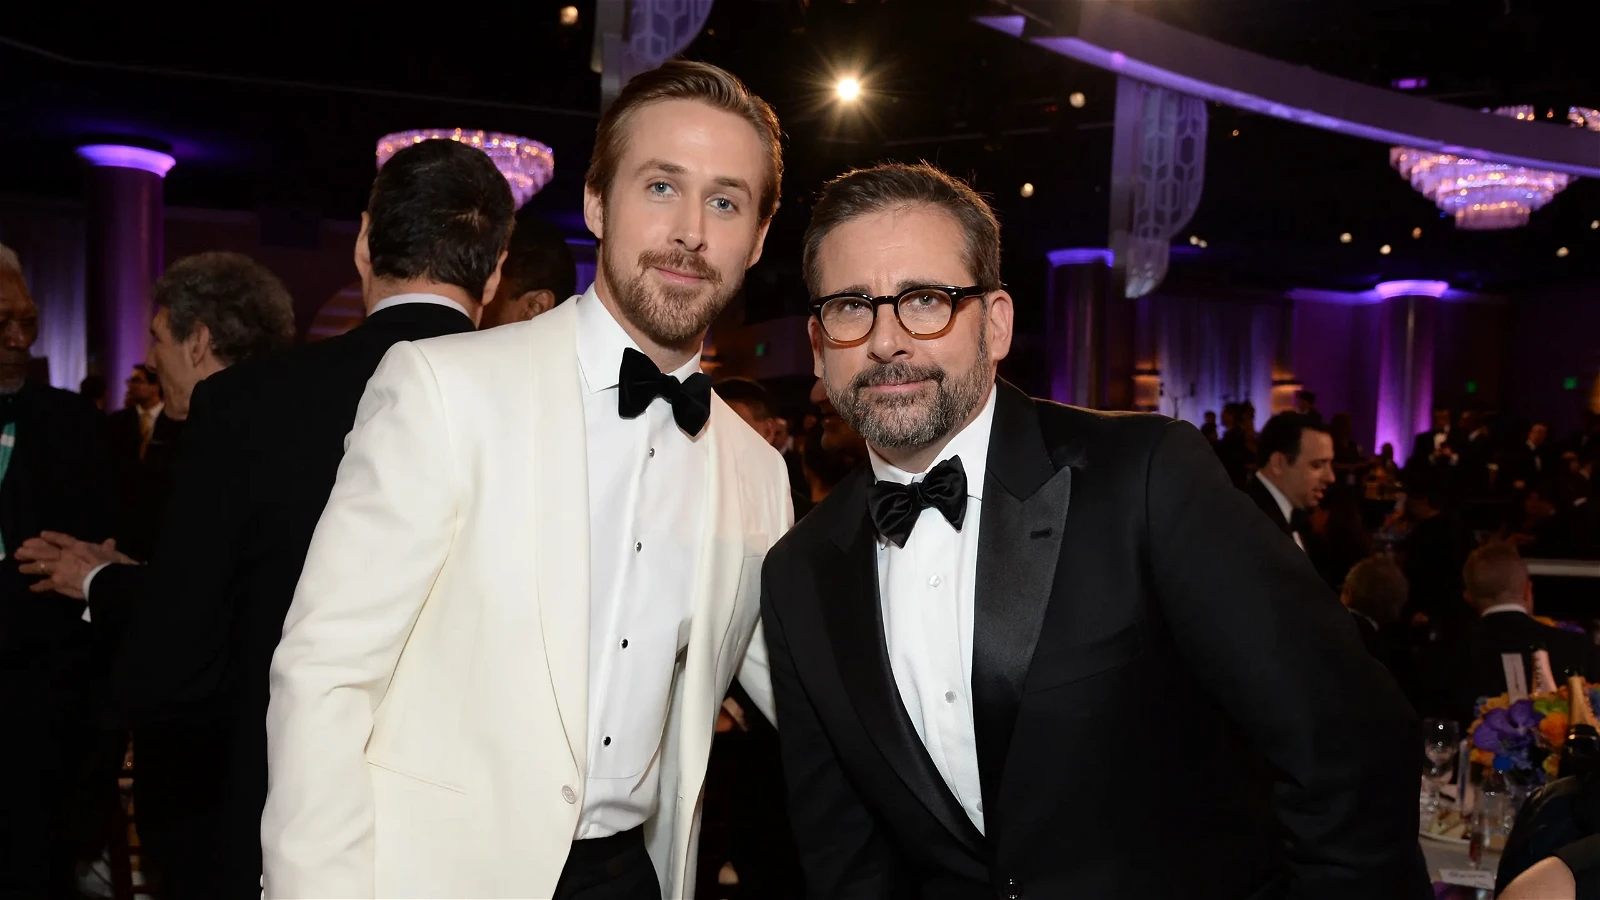 Ryan Gosling and Steve Carell together did a TV movie named The Unbelievables in 1999